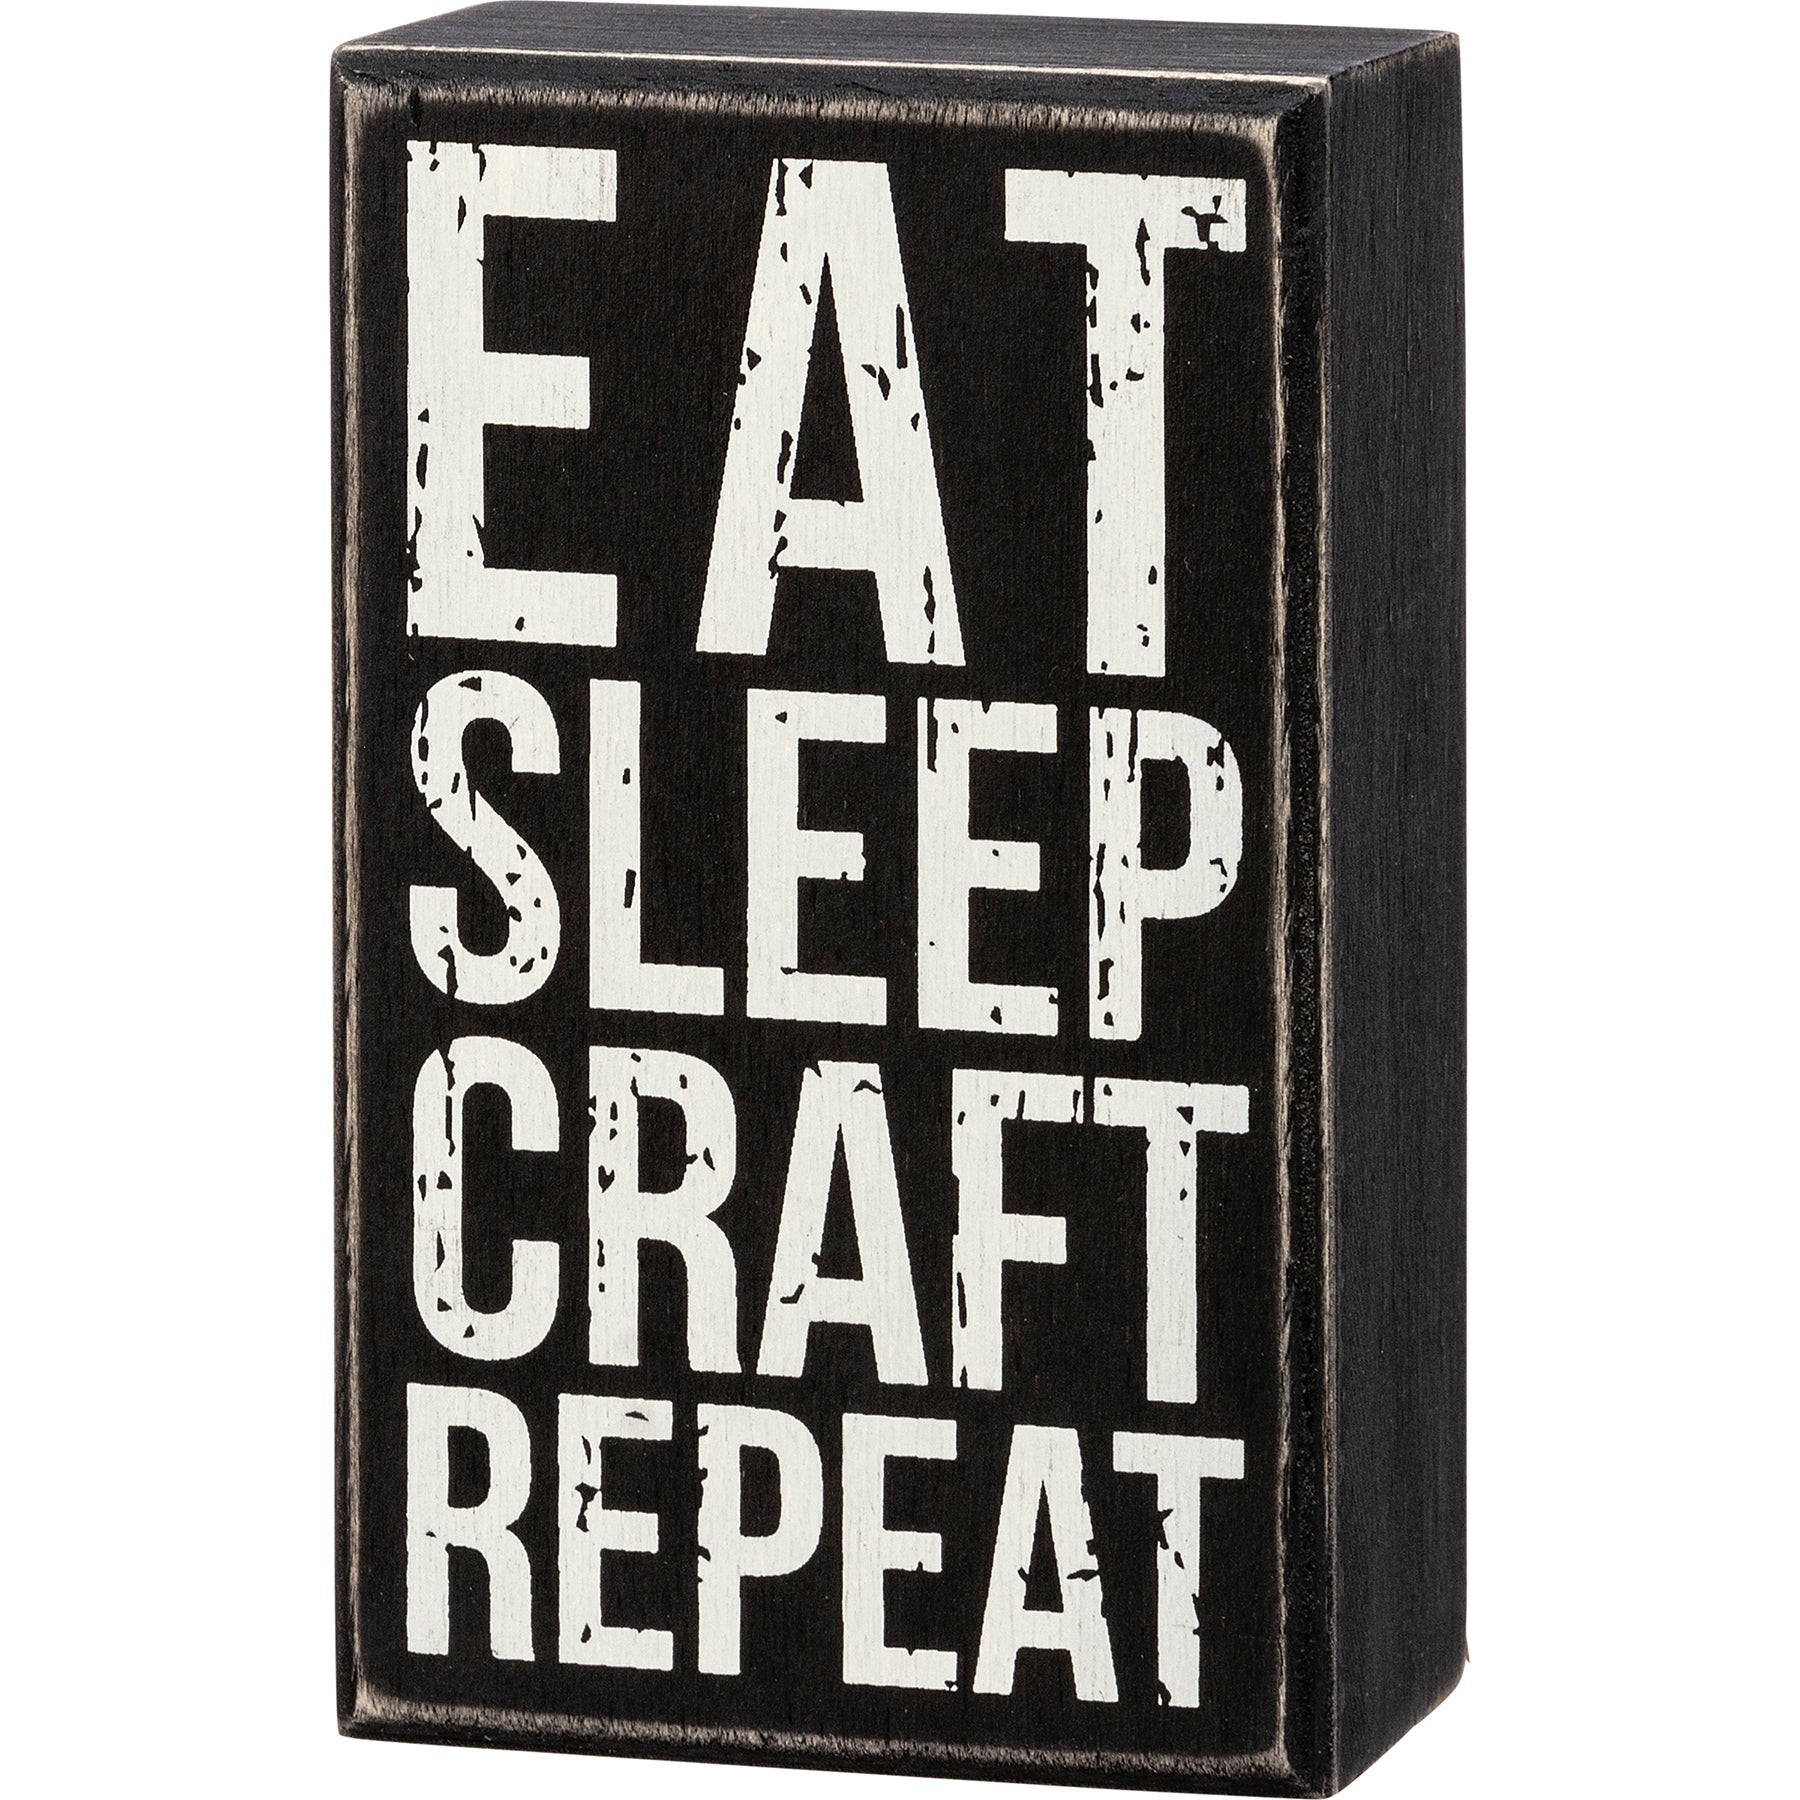 Eat Sleep Craft Repeat Wooden Box Sign, Funny/Rustic/Modern Quote Wall Art, Living/Dining/Bedroom, Cute Farmhouse Decor